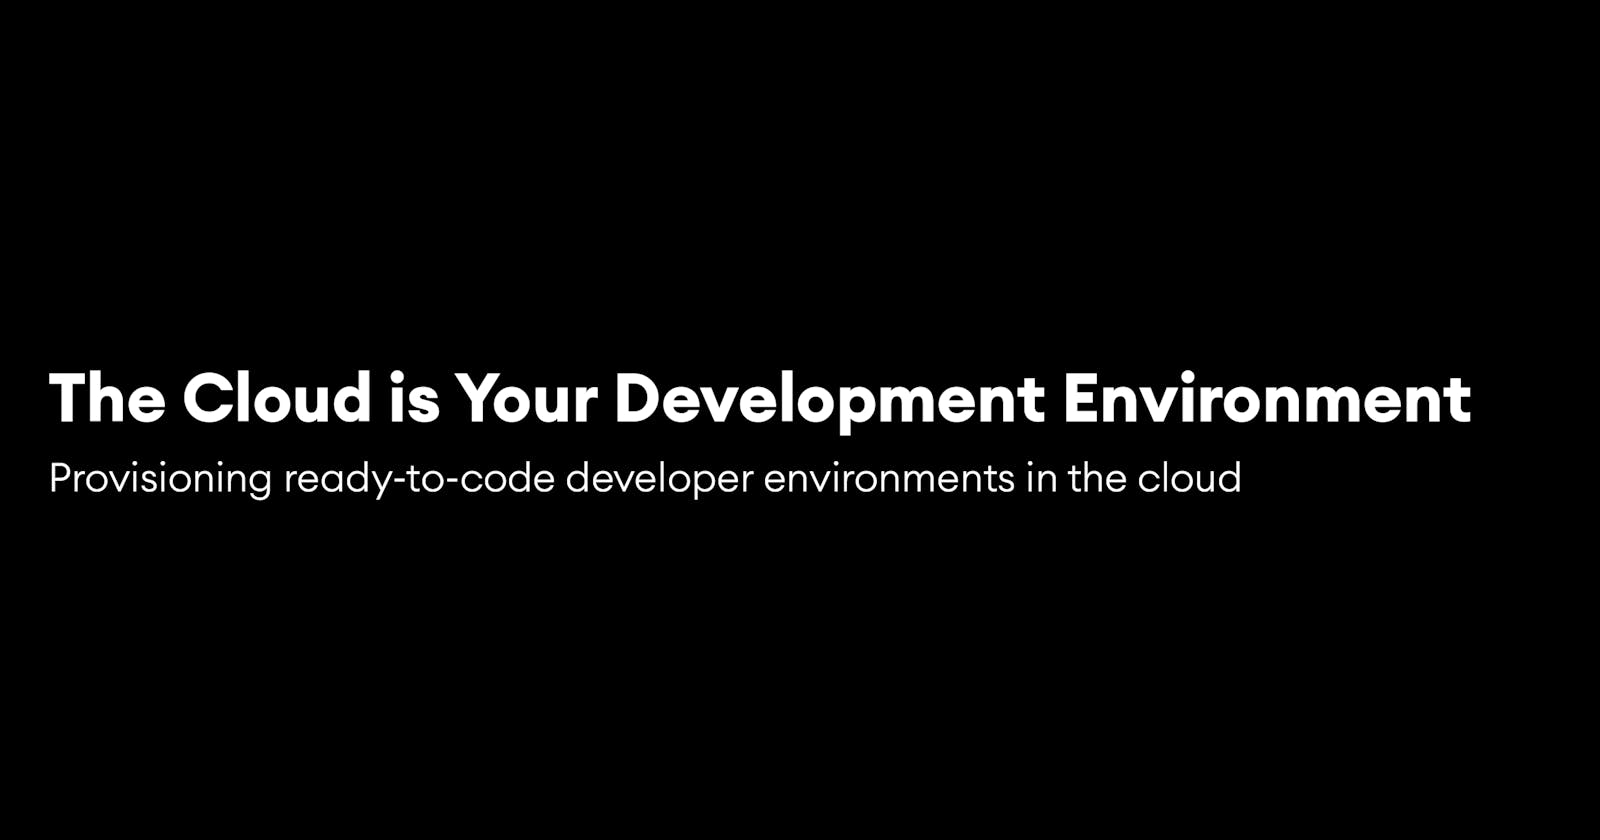 The Cloud is Your Development Environment